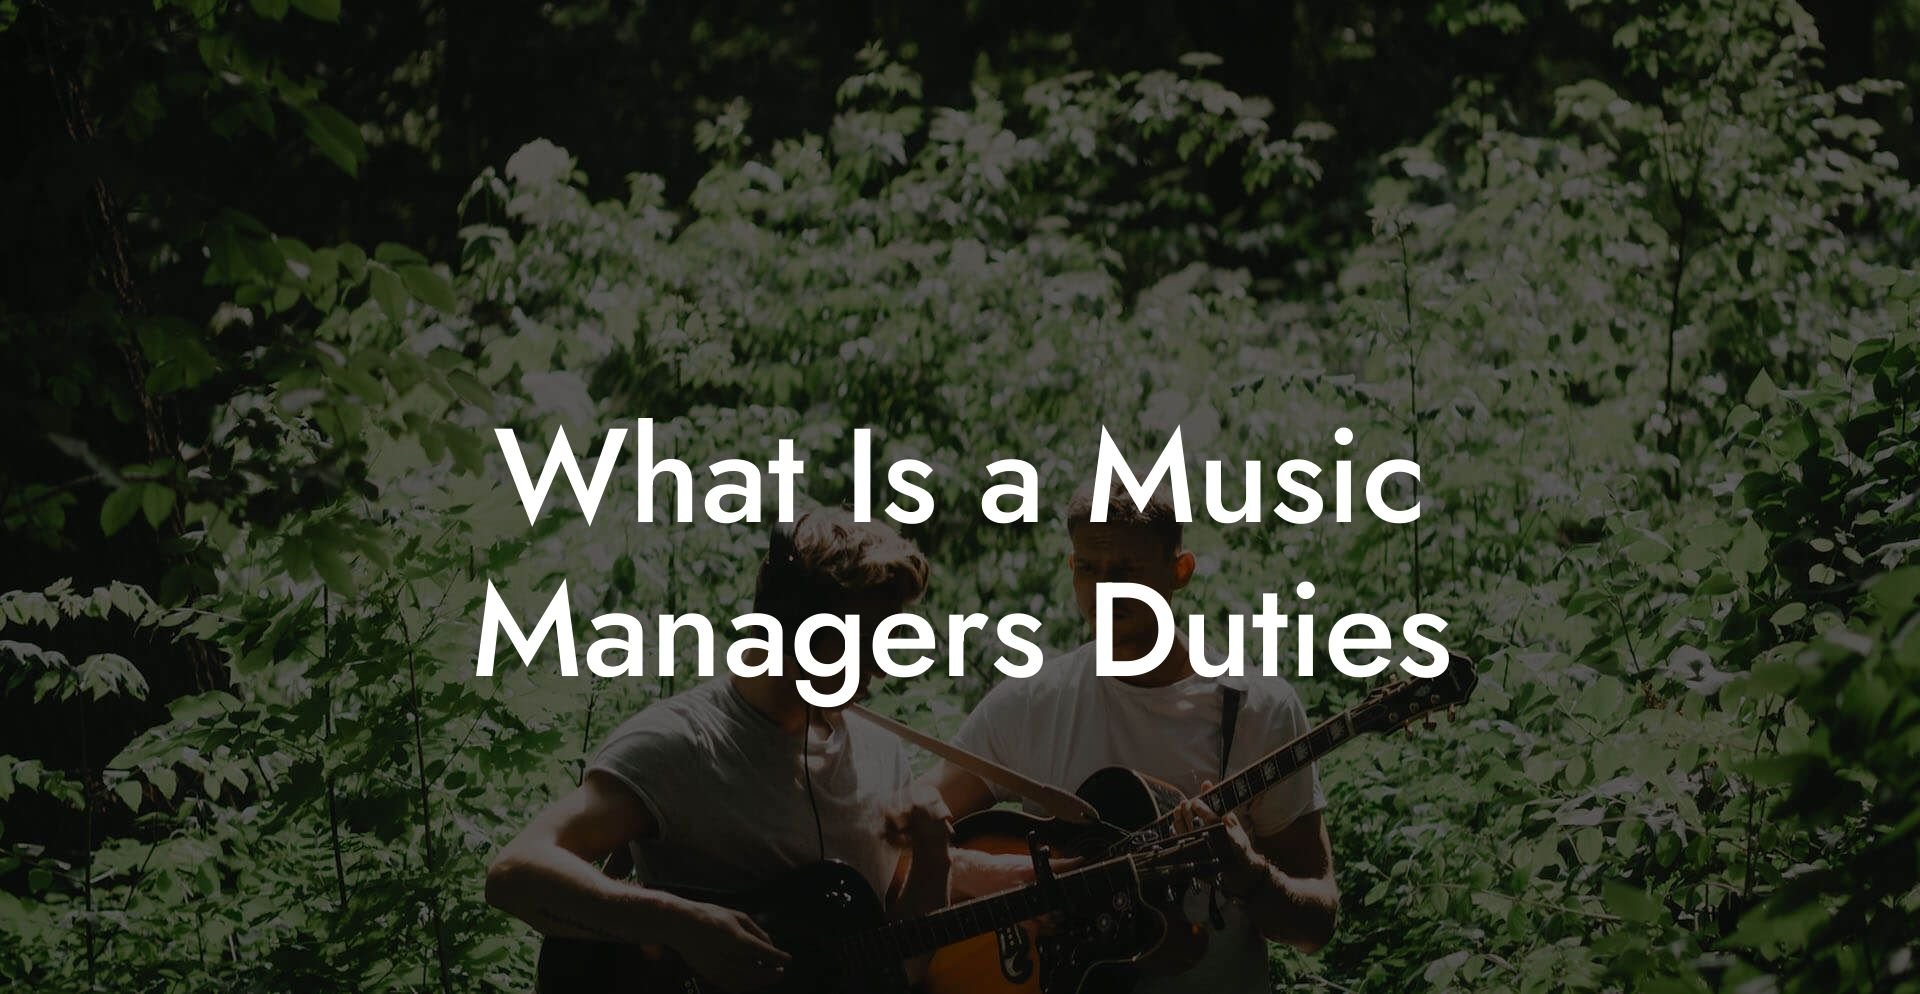 What Is a Music Managers Duties